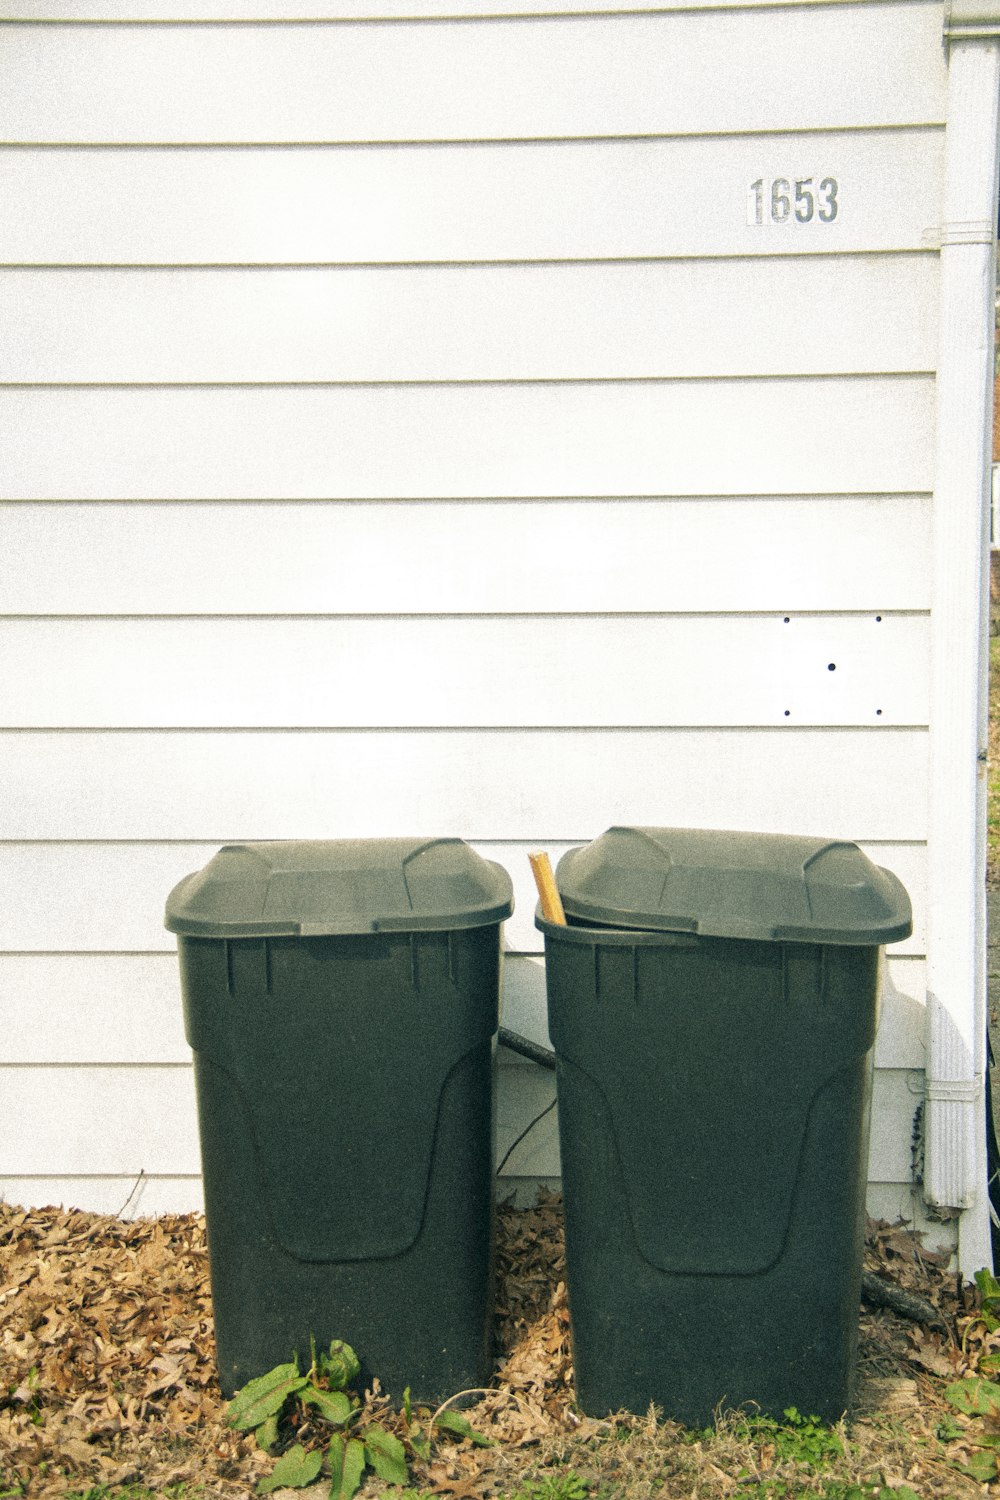 a group of garbage cans